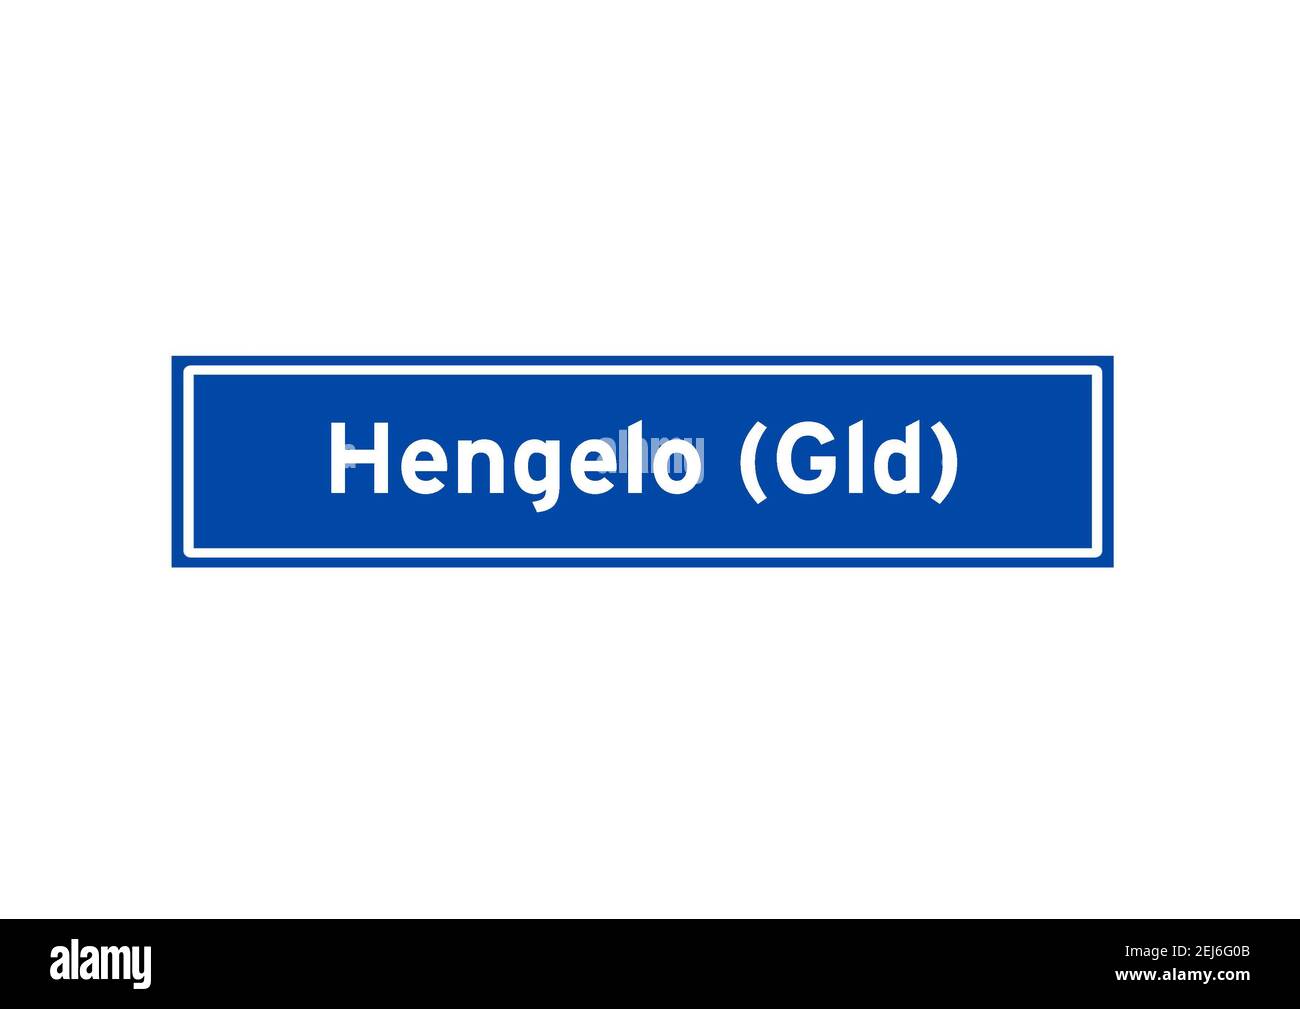 Hengelo Gld isolated Dutch place name sign. City sign from the Netherlands. Stock Photo